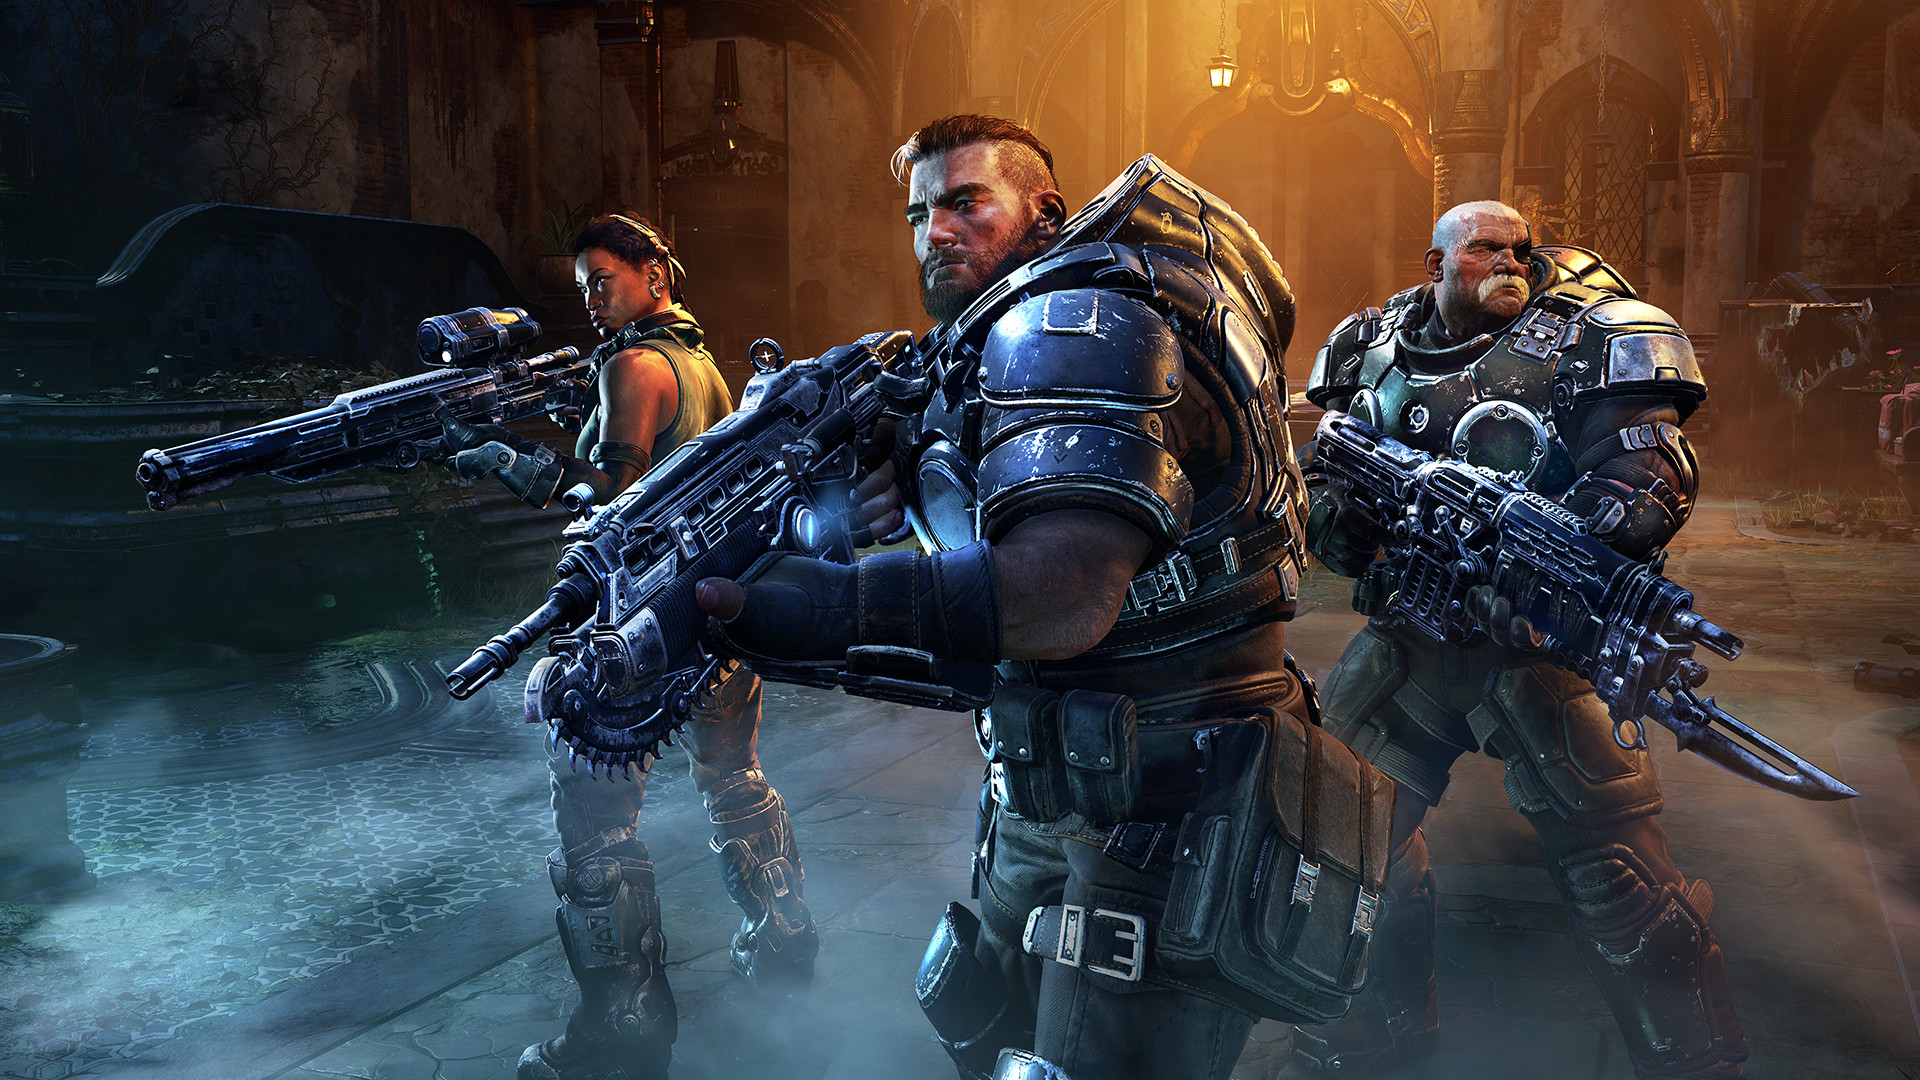 Gears Tactics already tops Steam charts, gains positive reviews